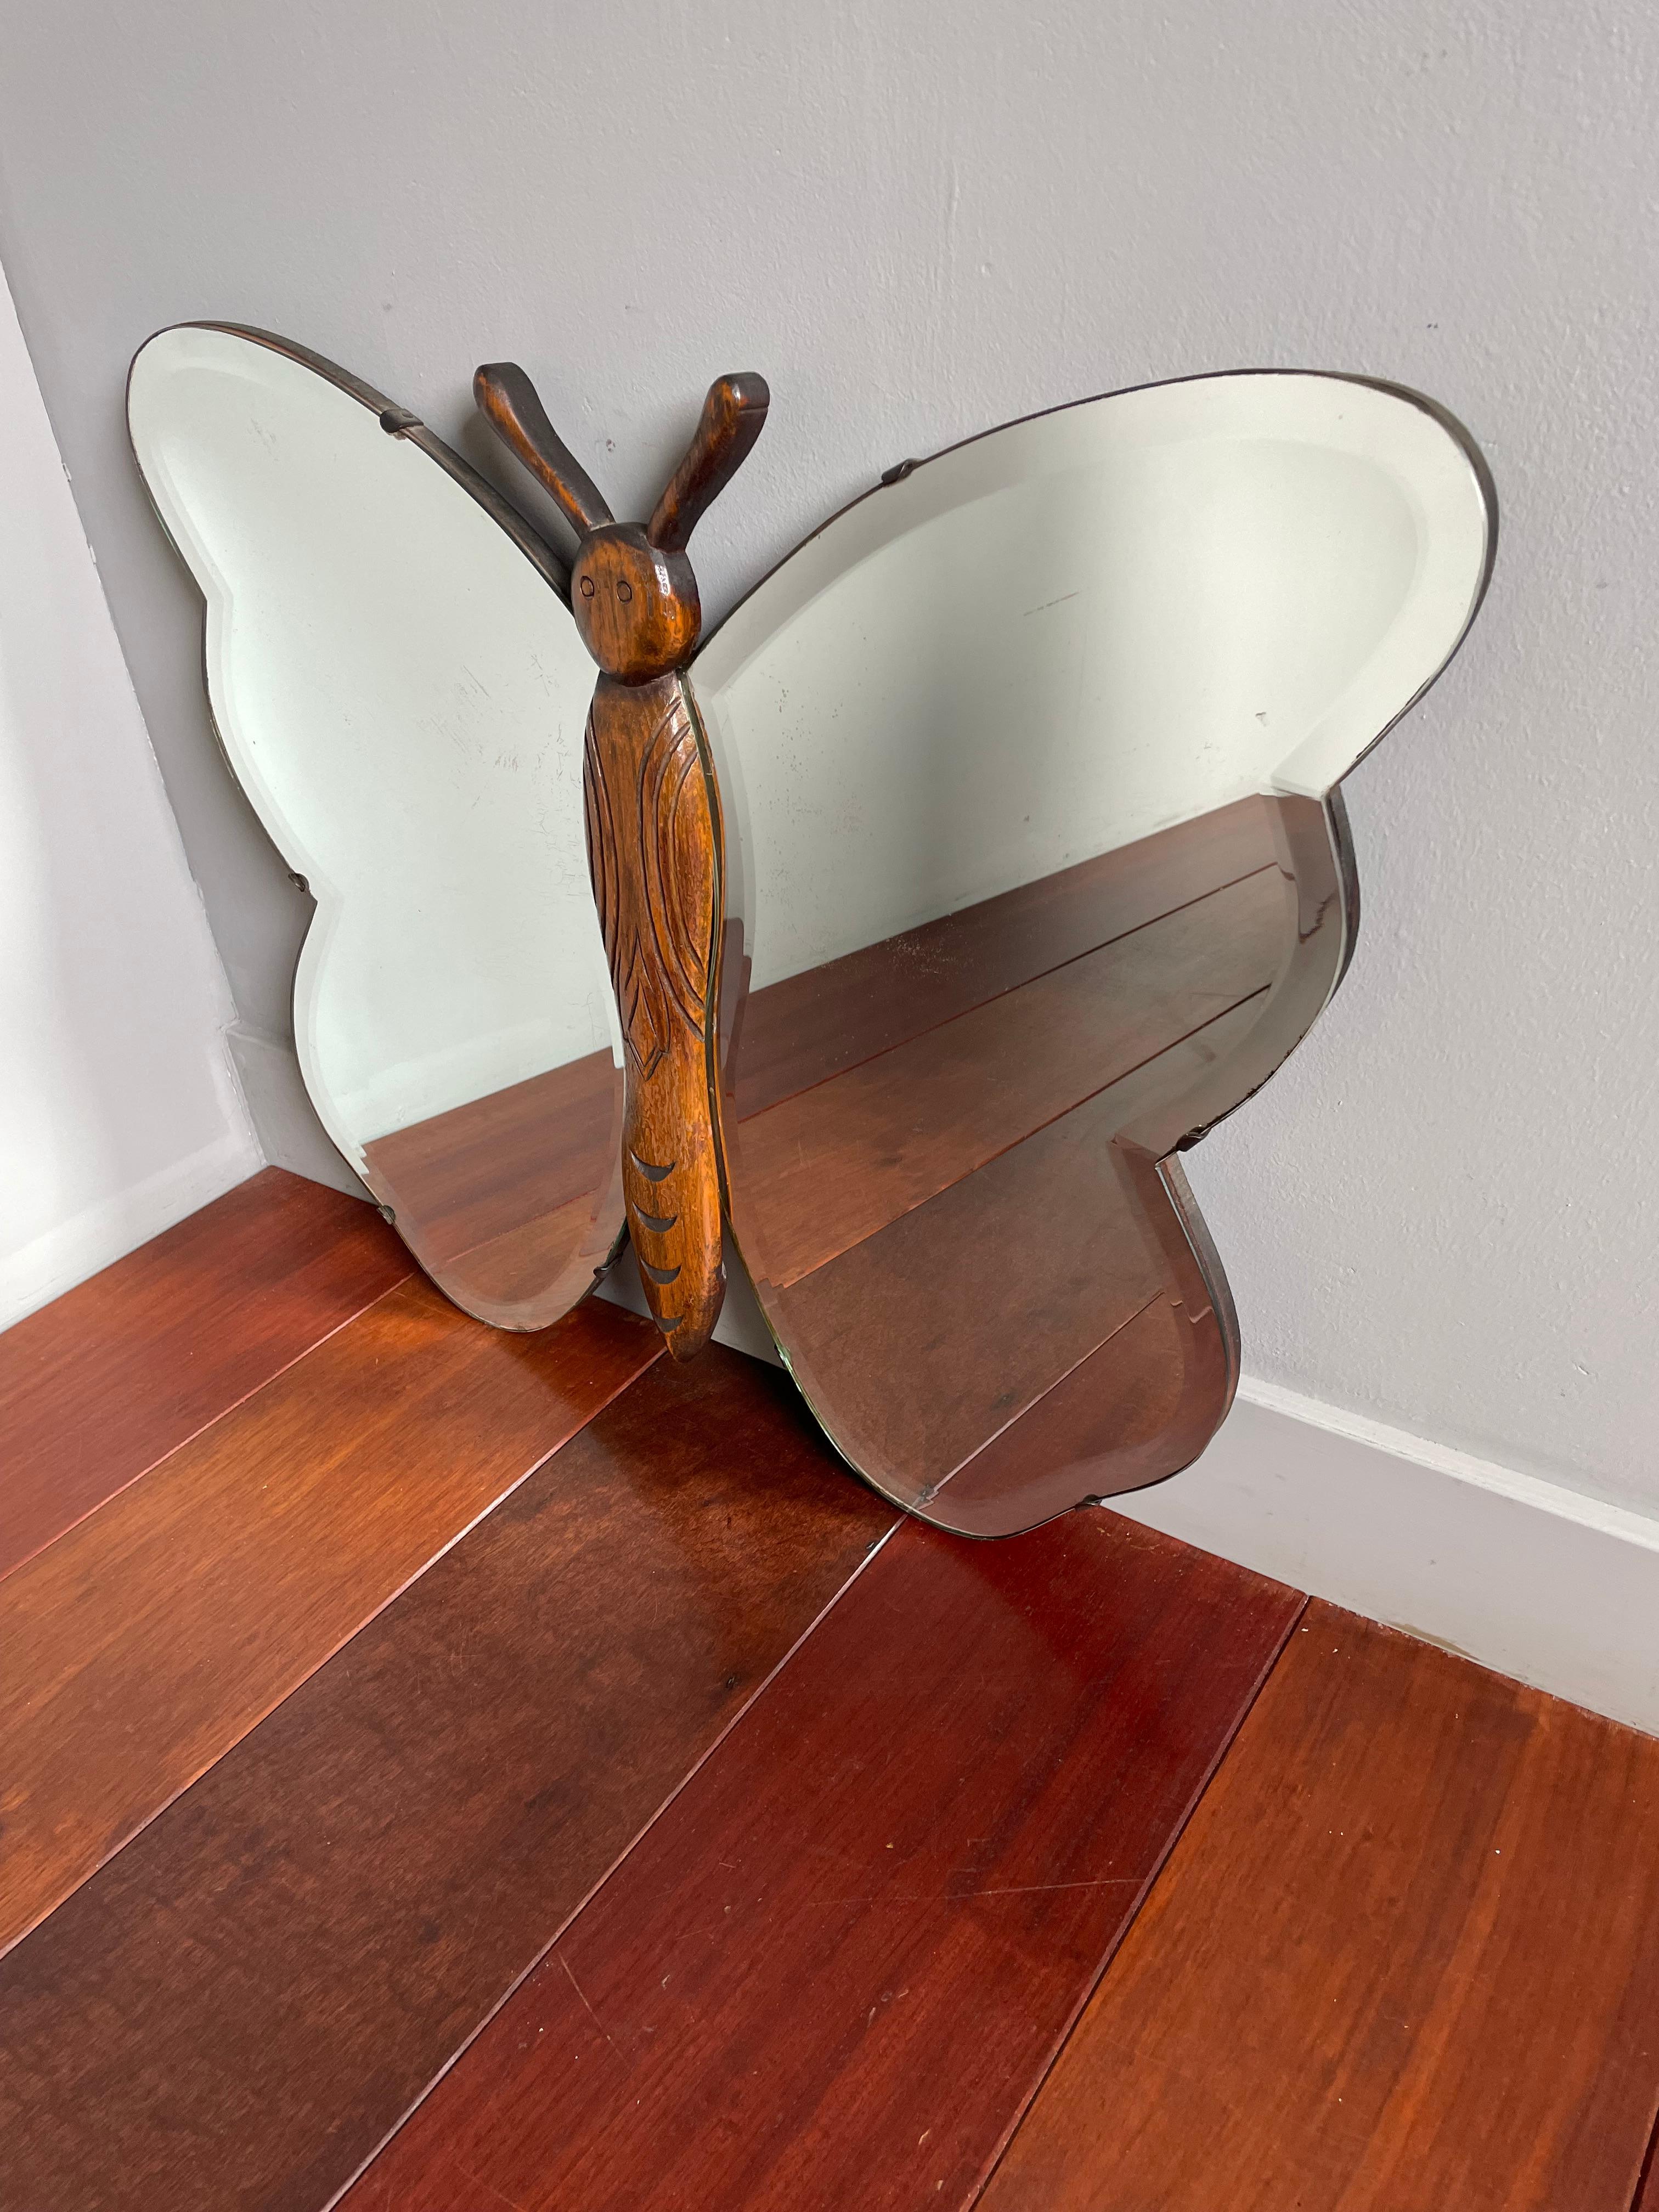 Metal Rare Midcentury Made, Butterfly Design Oak Wood and Beveled Glass Wall Mirror